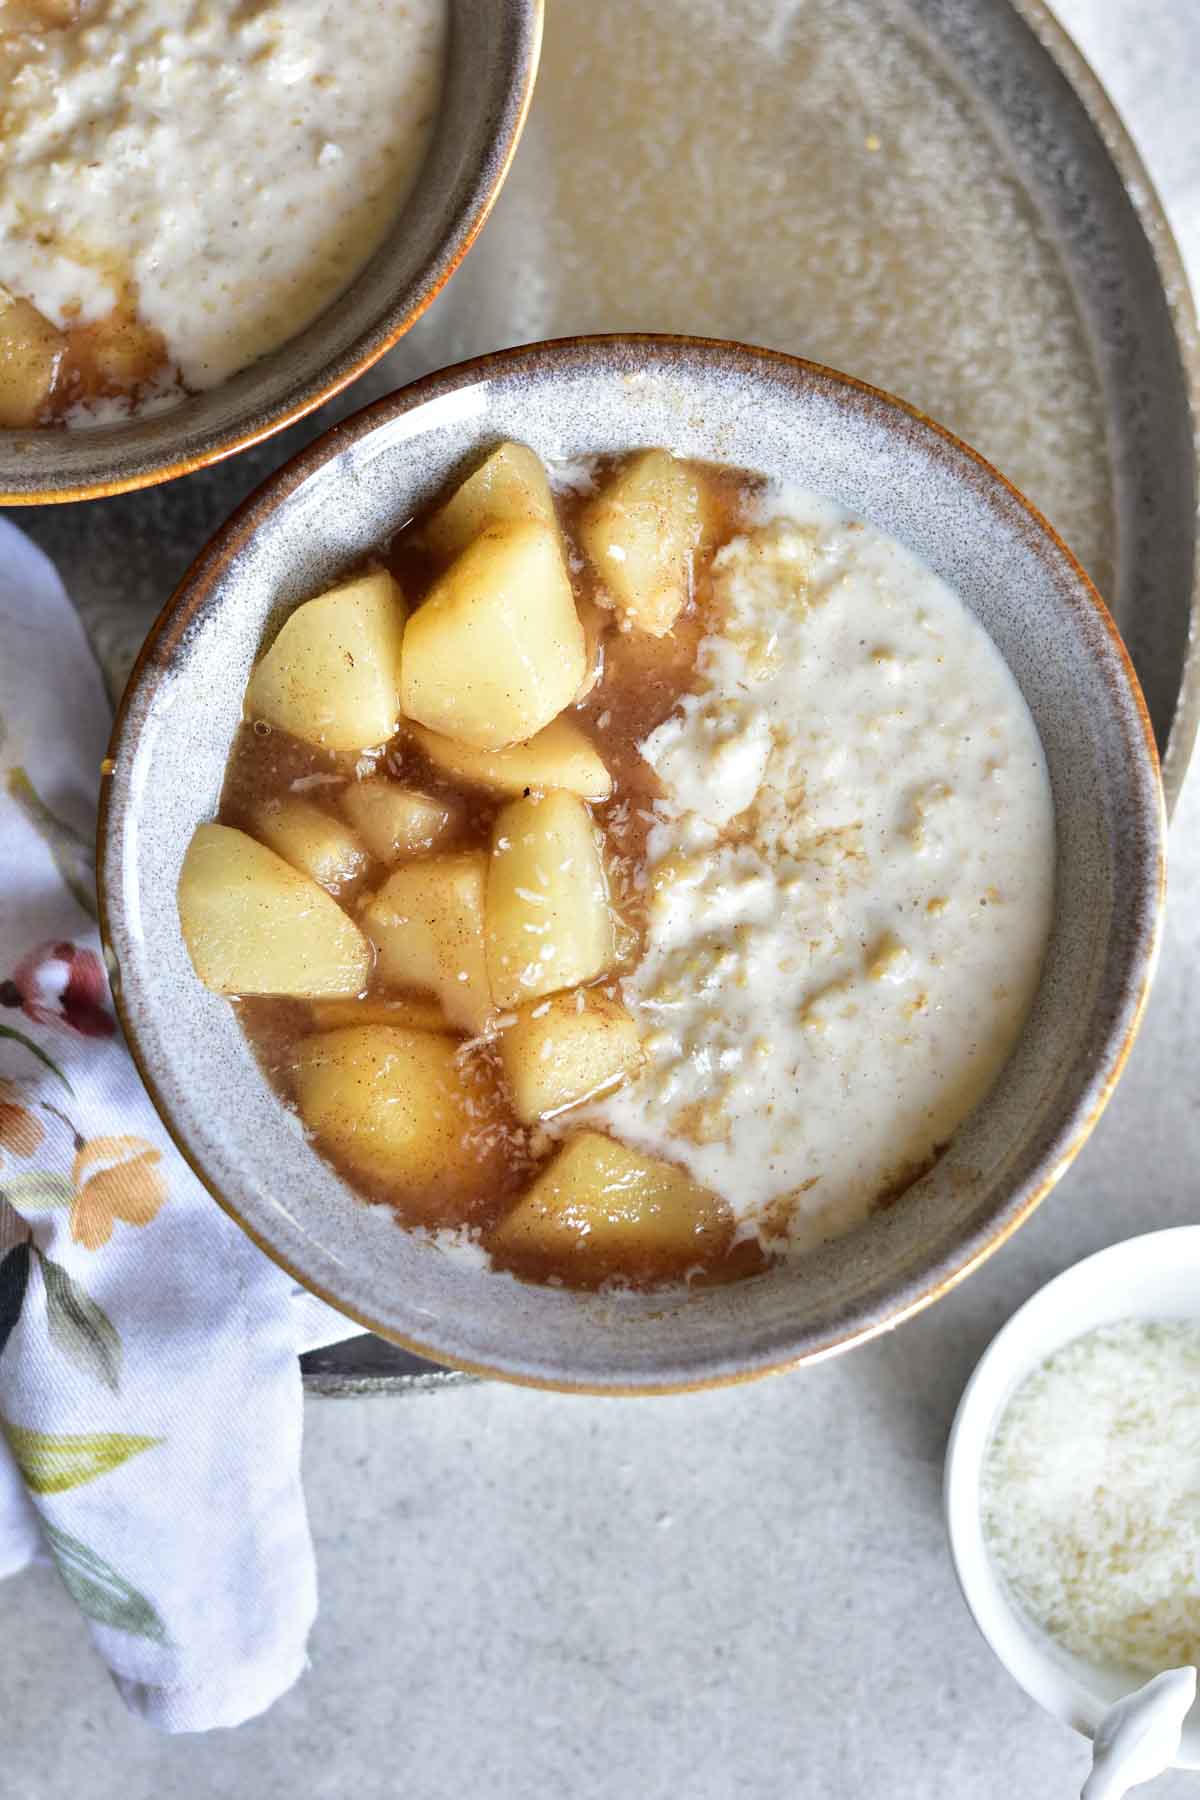 Creamy coconut oatmeal with spiced pears